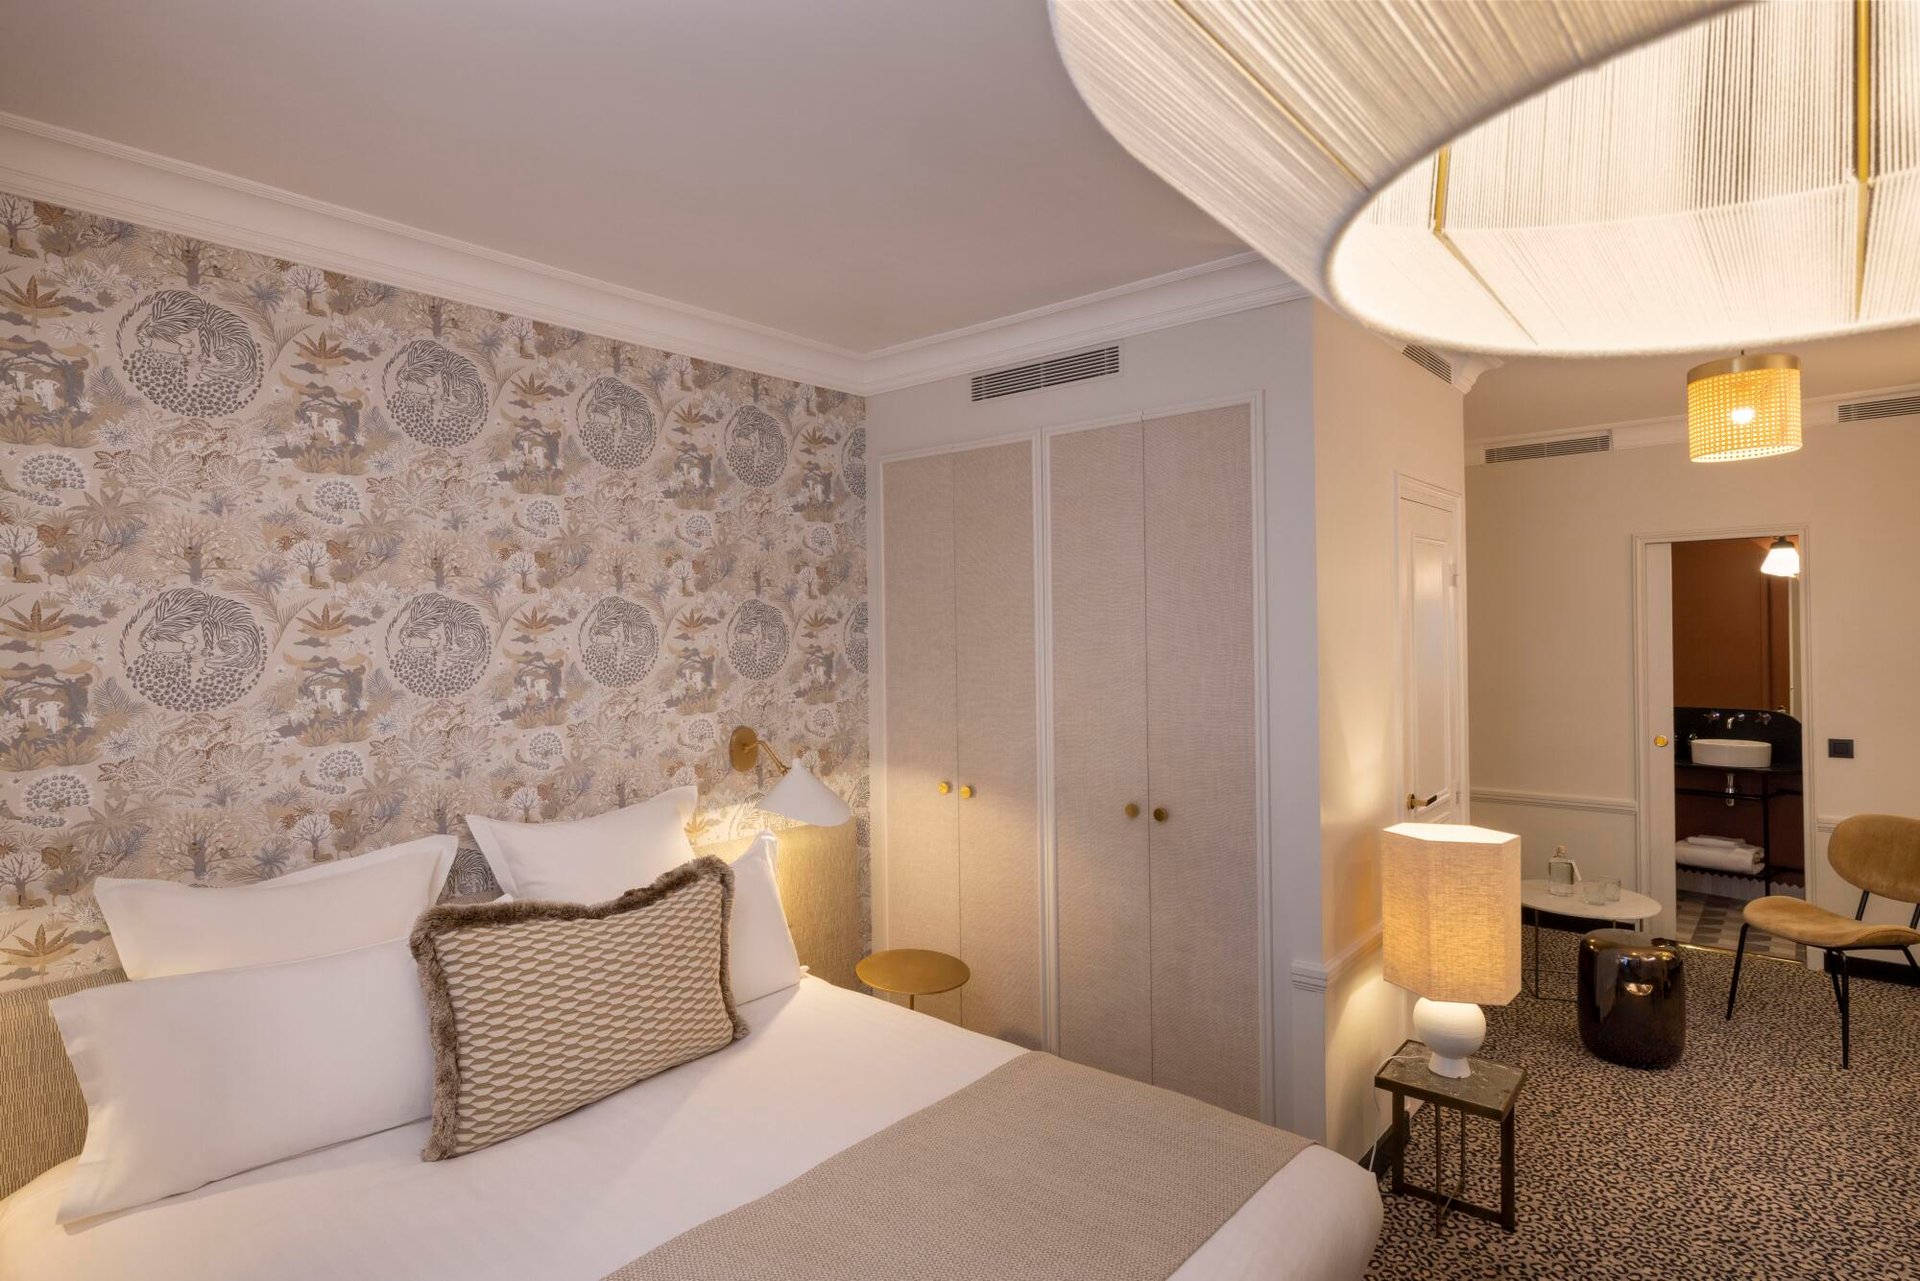 The executive suite for 2 persons, for a romance at the Gramont hotel close to the Opera Garnier